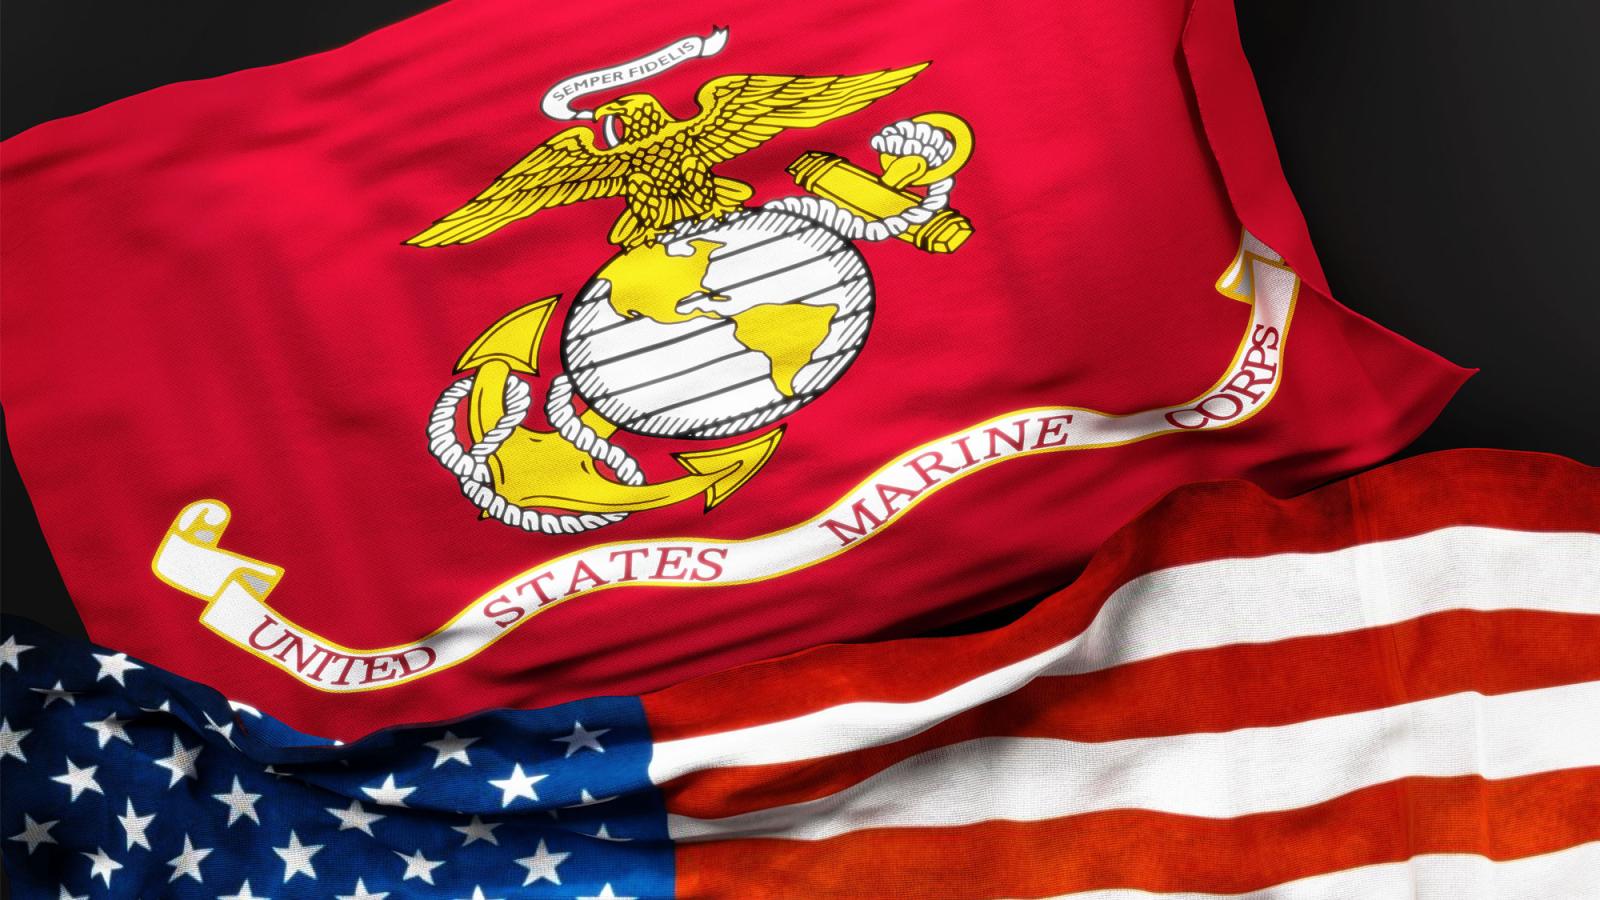 US Marine Corps and American flags